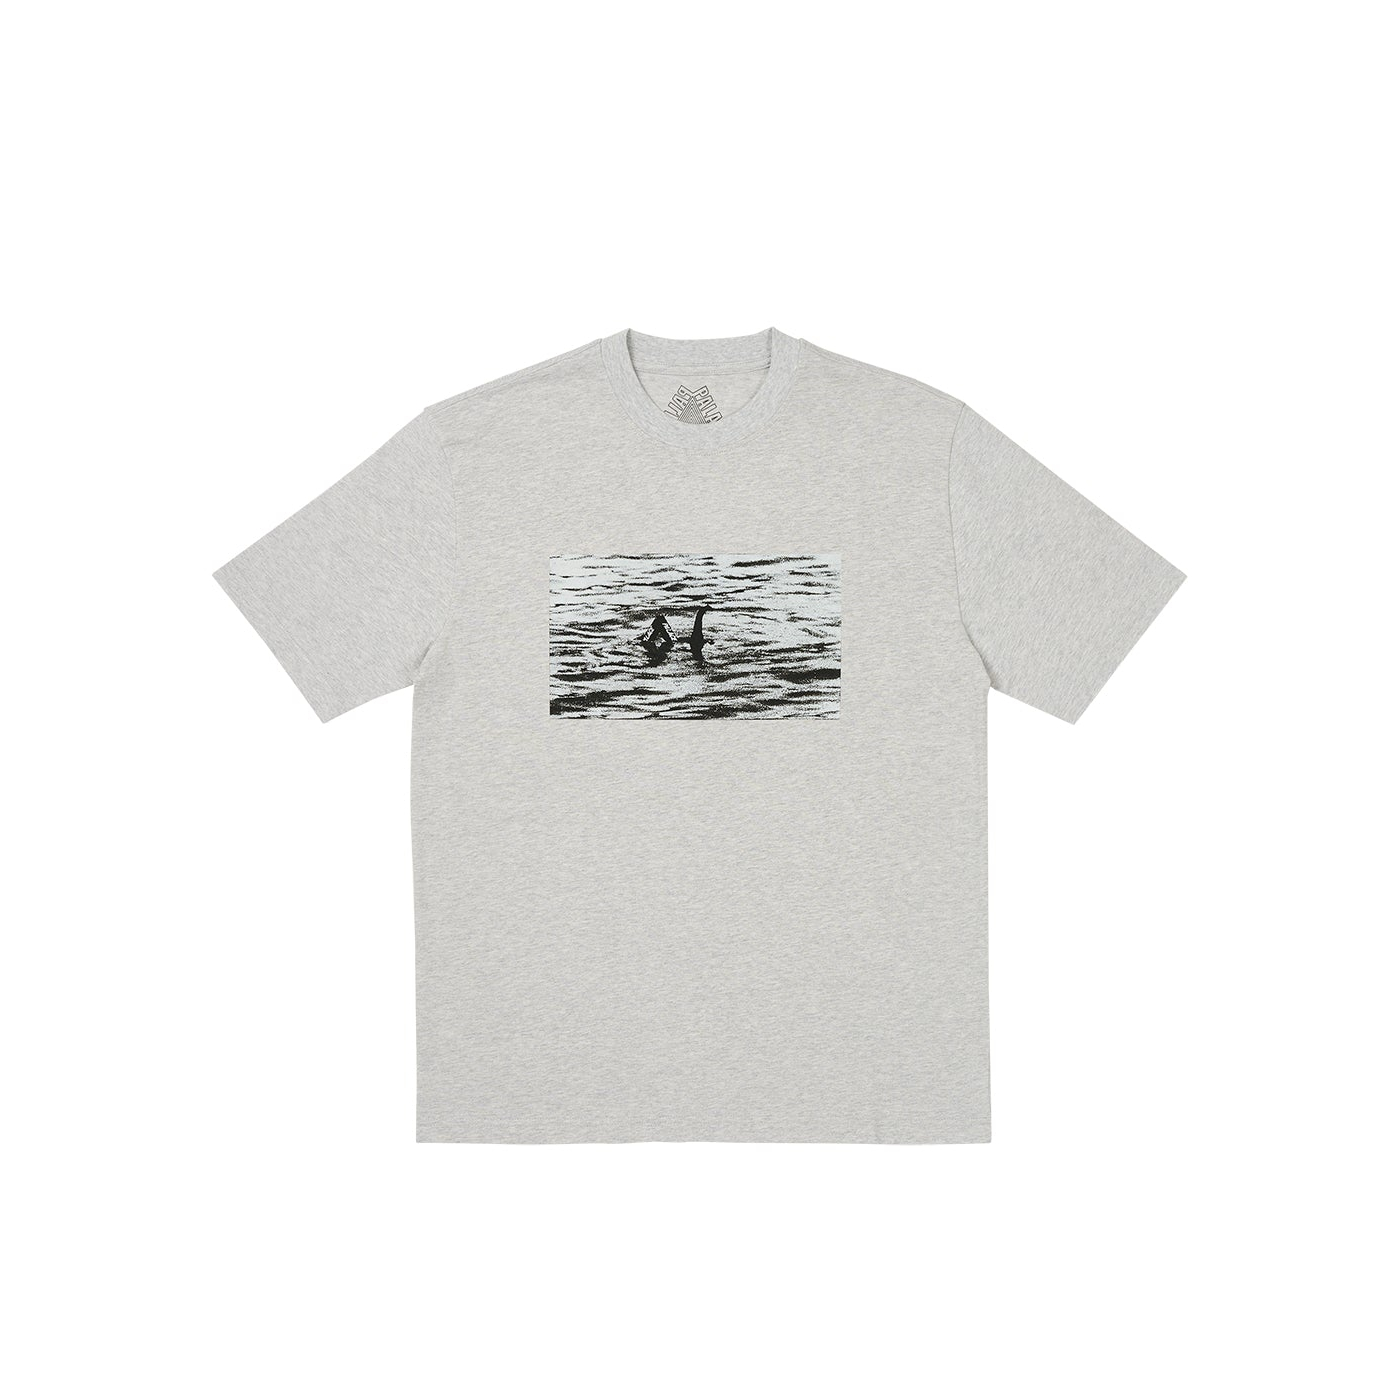 Thumbnail NESSIE T-SHIRT GREY MARL one color